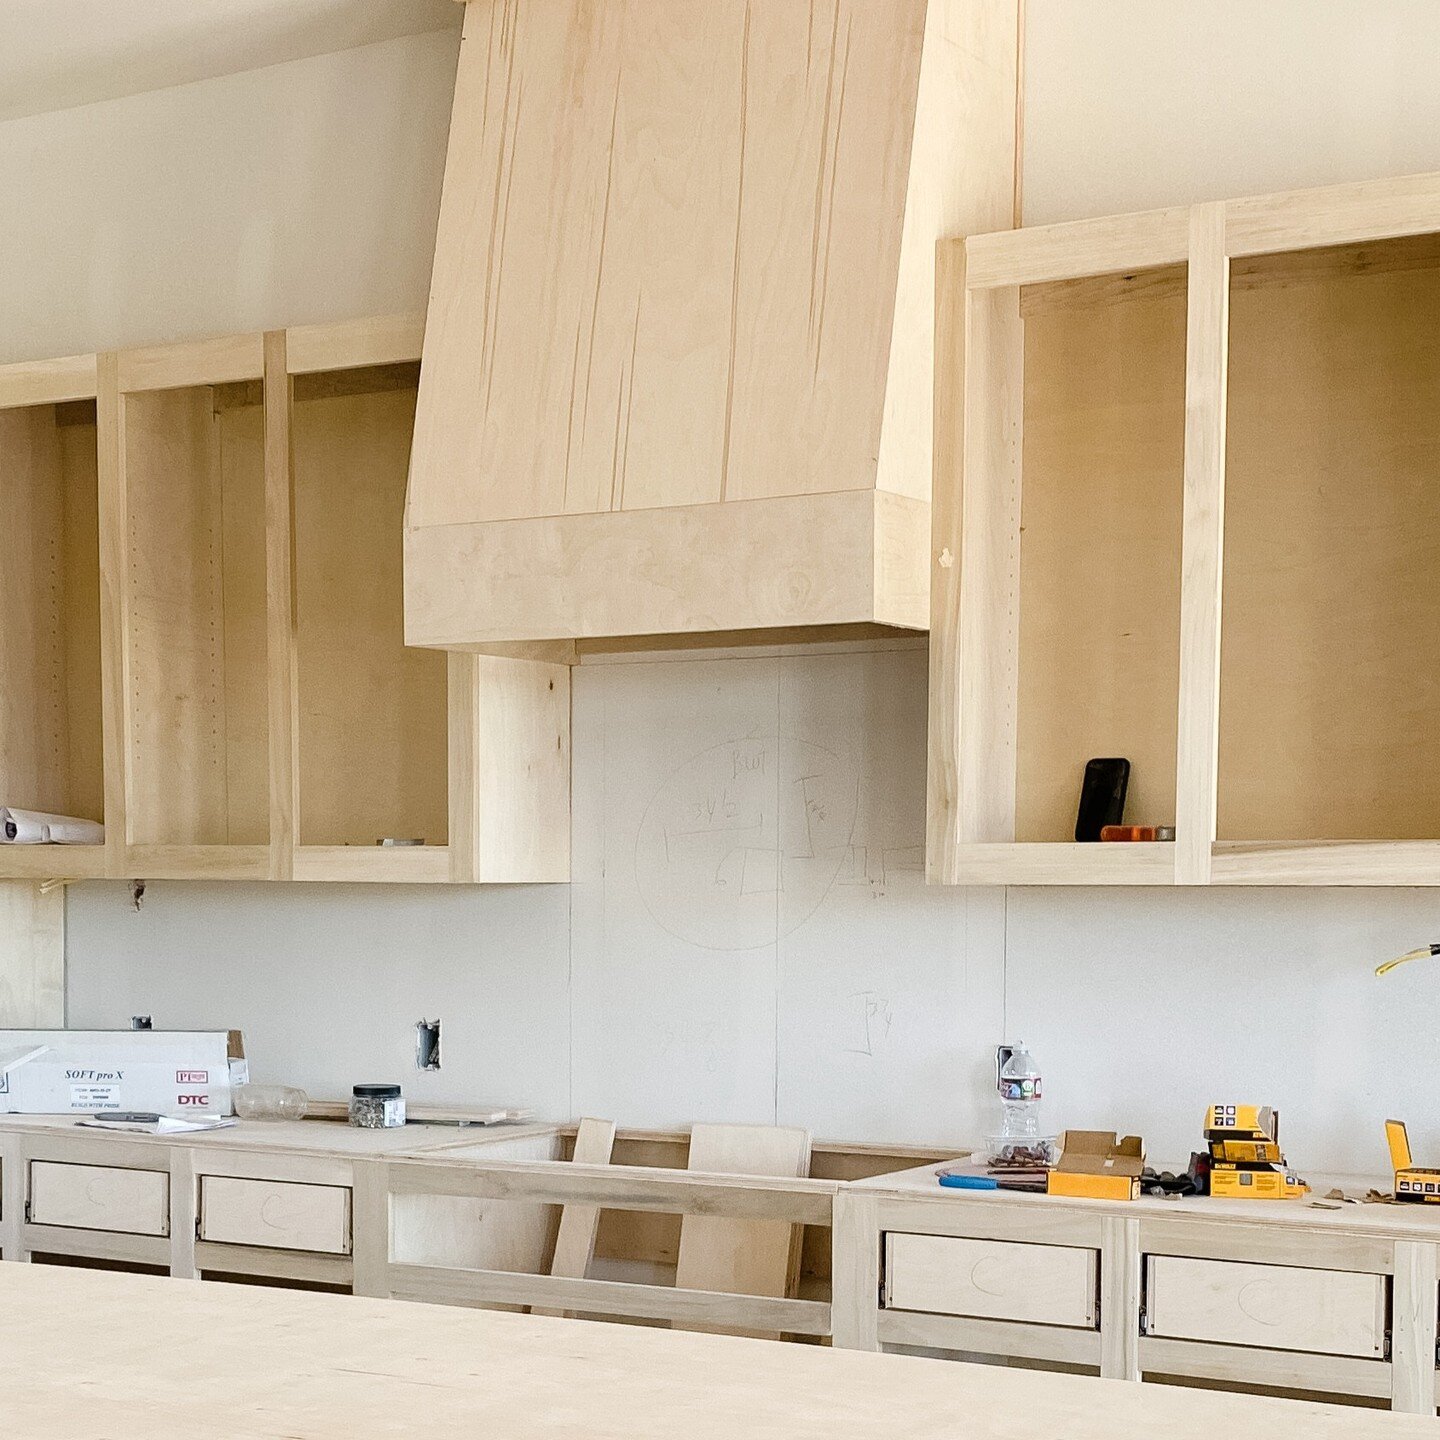 Cabinets are going in! After almost two years of work, we are almost done with this incredible home.

The most important things we considered when building this home were the needs of a potential buyer. Throughout each step of the design process, we 